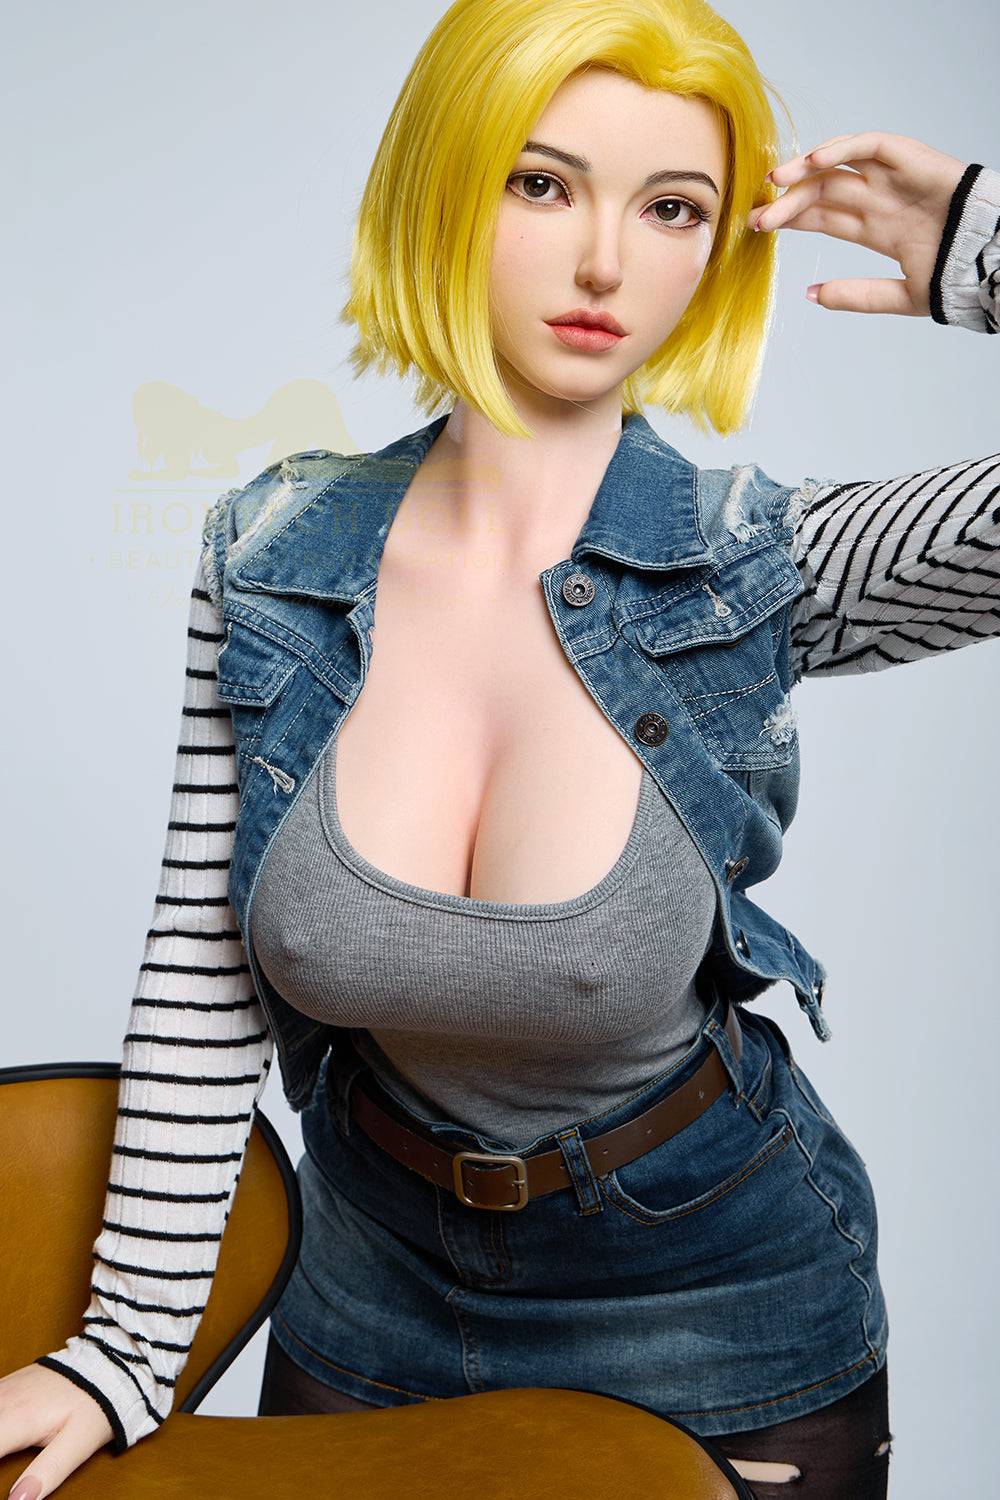 Irontechdoll Katie 159cm S41 Natural Skin Sex Doll Full Silicone Realistic Adult Love Doll